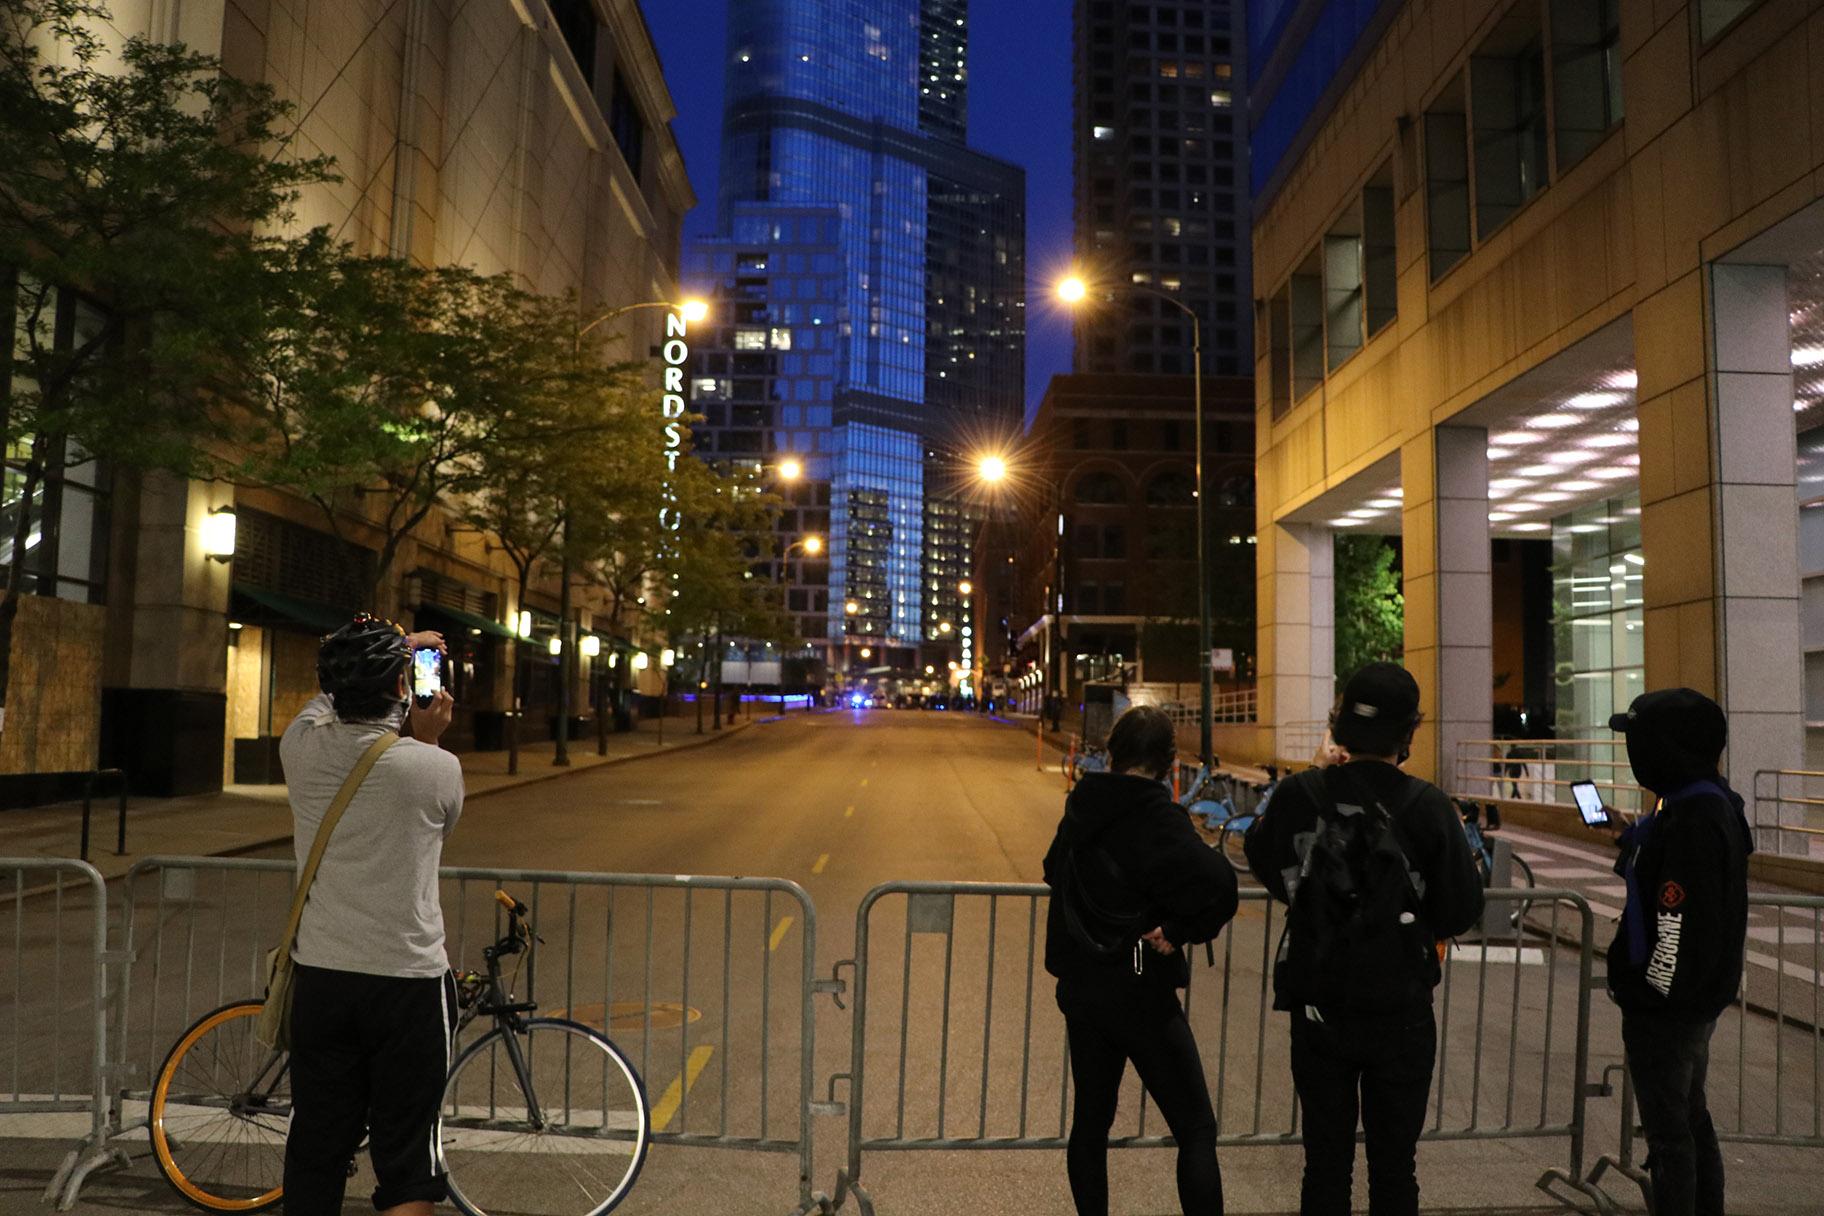 Onlookers photograph the police presence on Wabash Avenue behind a barricade. (Evan Garcia / WTTW News)